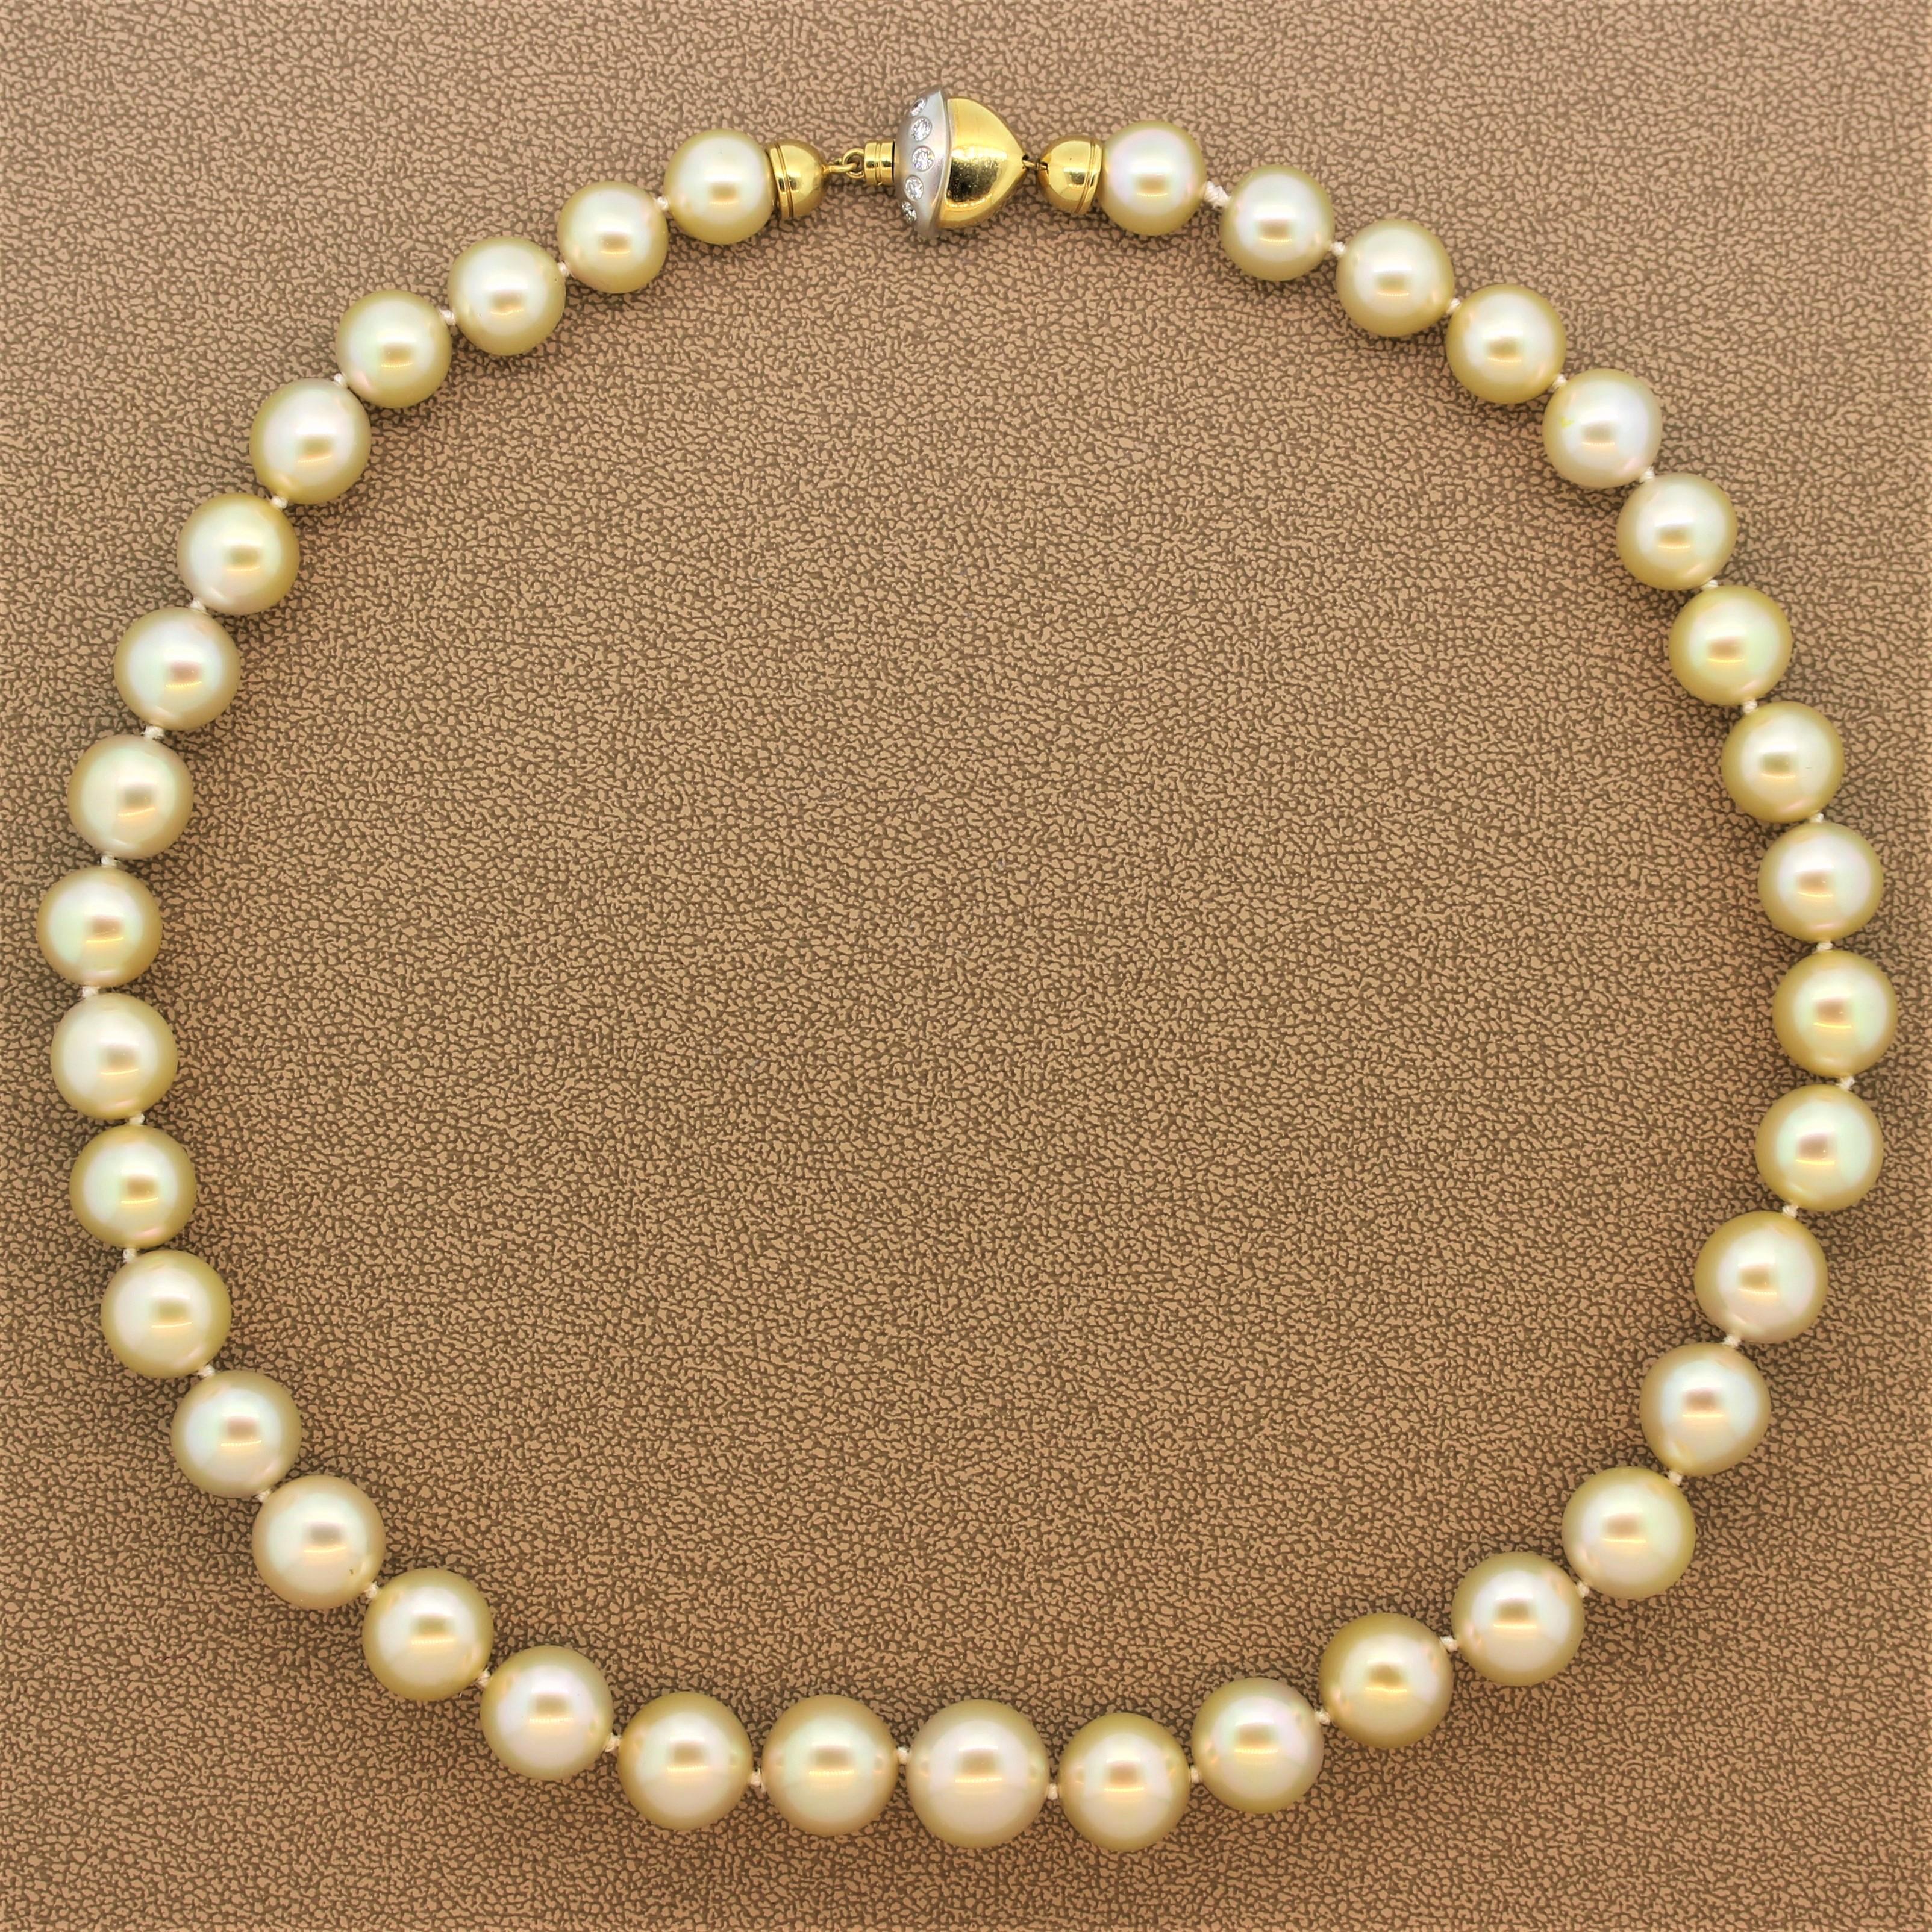 A beautiful golden South Sea pearl necklace featuring lustrous graduating gold pearls are free of dimples and dives which measure 13.65mm-10.50mm. The single strand necklace has a secure diamond studded lock of a two-tone 18K yellow and white